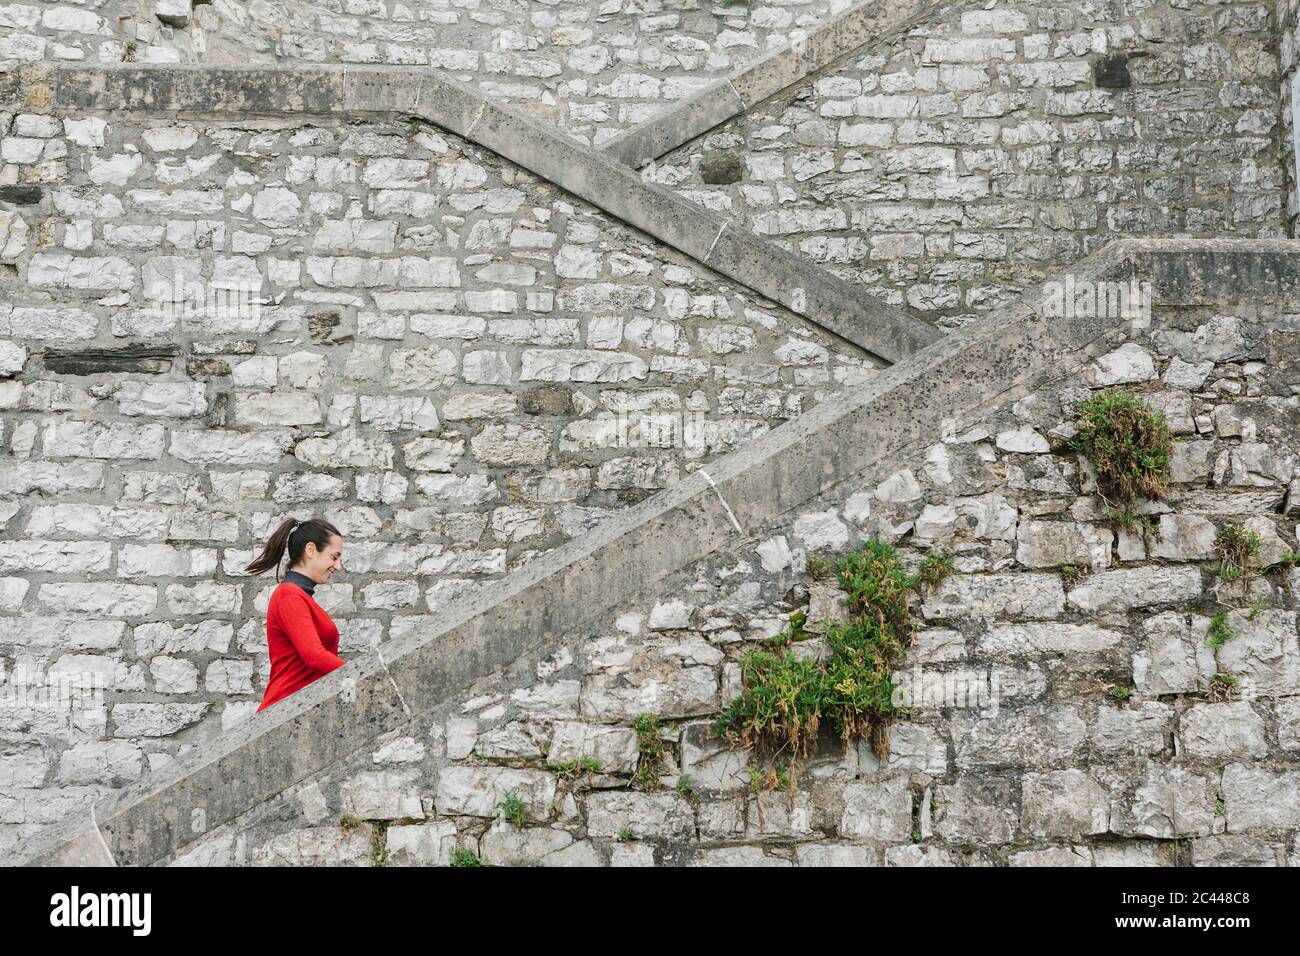 Side view of smiling woman moving up on staircase, Itzurun, Zumaia, Spanish Basque Country, Spain Stock Photo